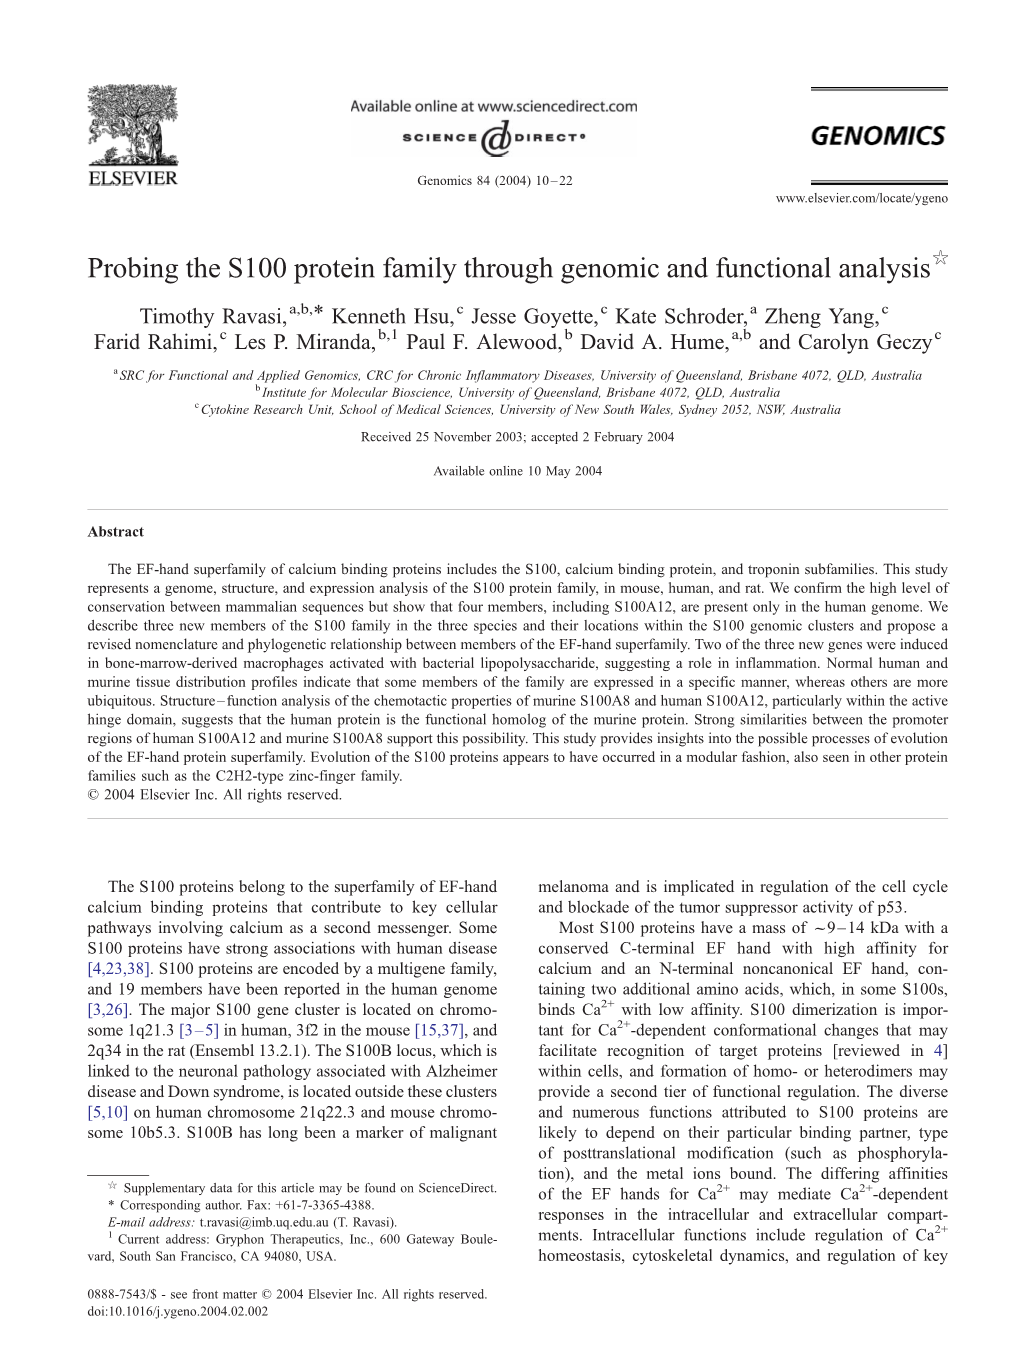 Probing the S100 Protein Family Through Genomic and Functional Analysis$